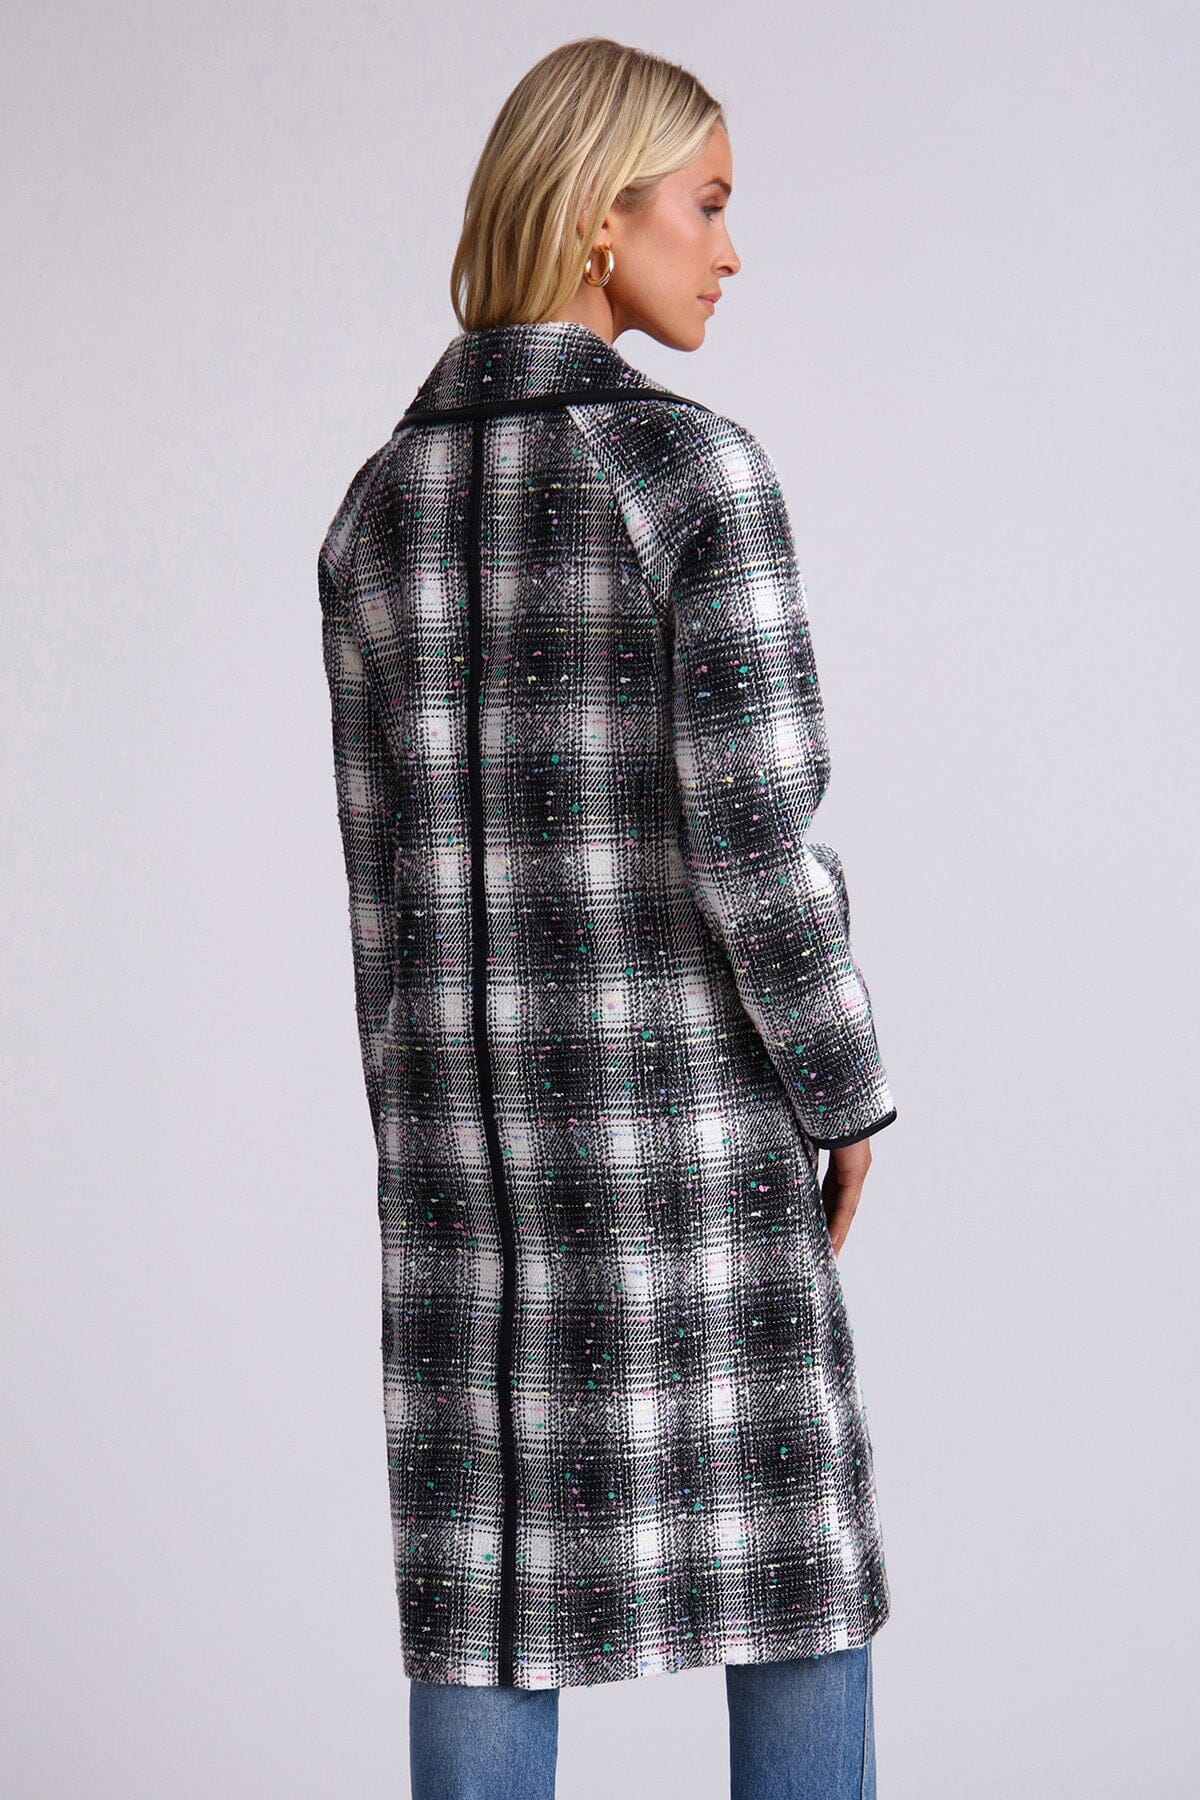 Black multi plaid tweed double breasted coat jacket - figure flattering everyday fashion coats outerwear for women